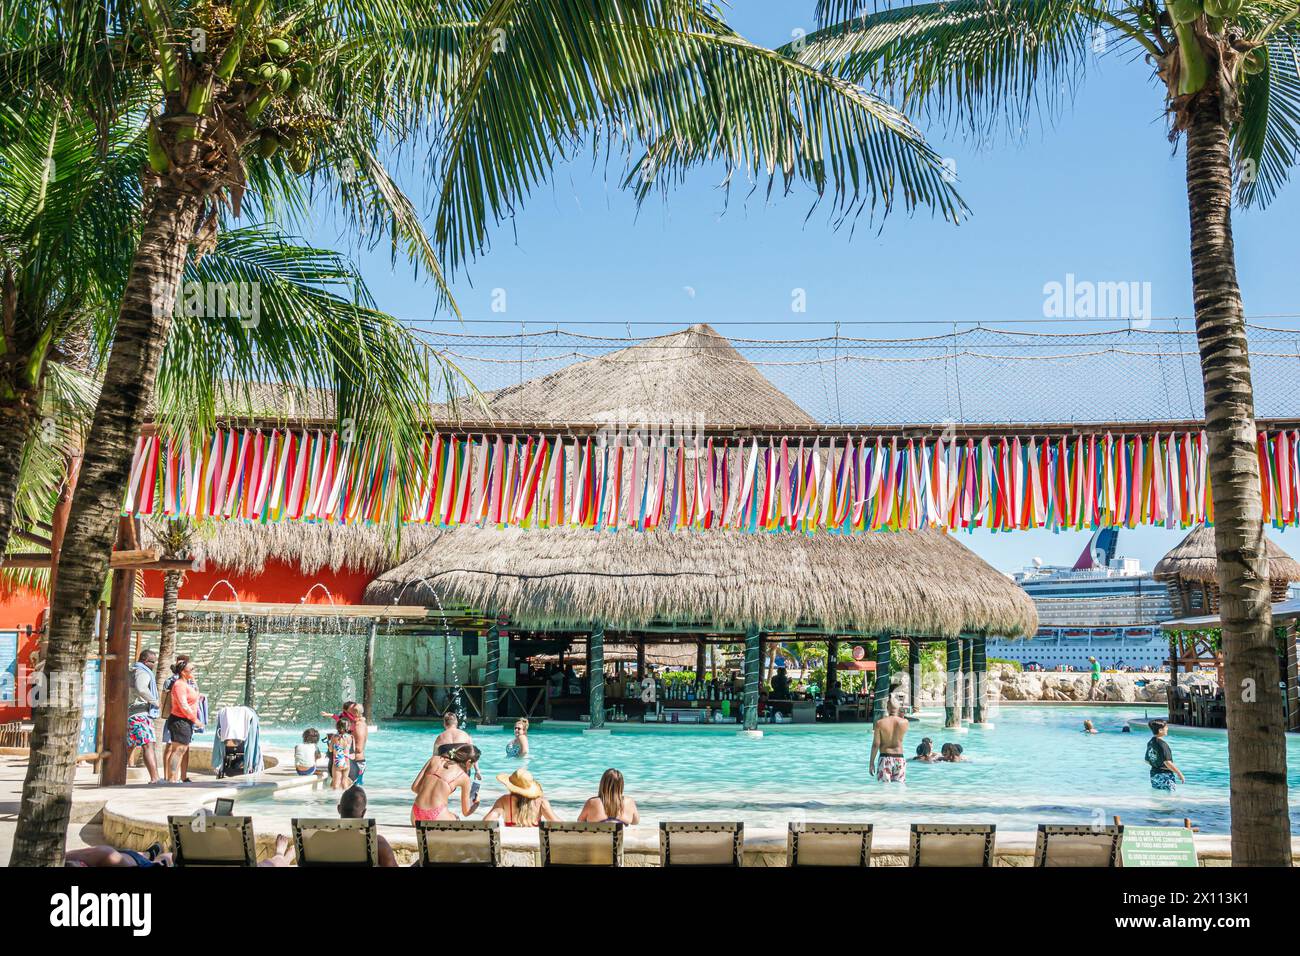 Costa Maya Mexico,Cruise Port,Norwegian Joy Cruise Line ship,7-day Caribbean Sea itinerary,swimming pool,floating bar,palapa thatched roof dried palm Stock Photo